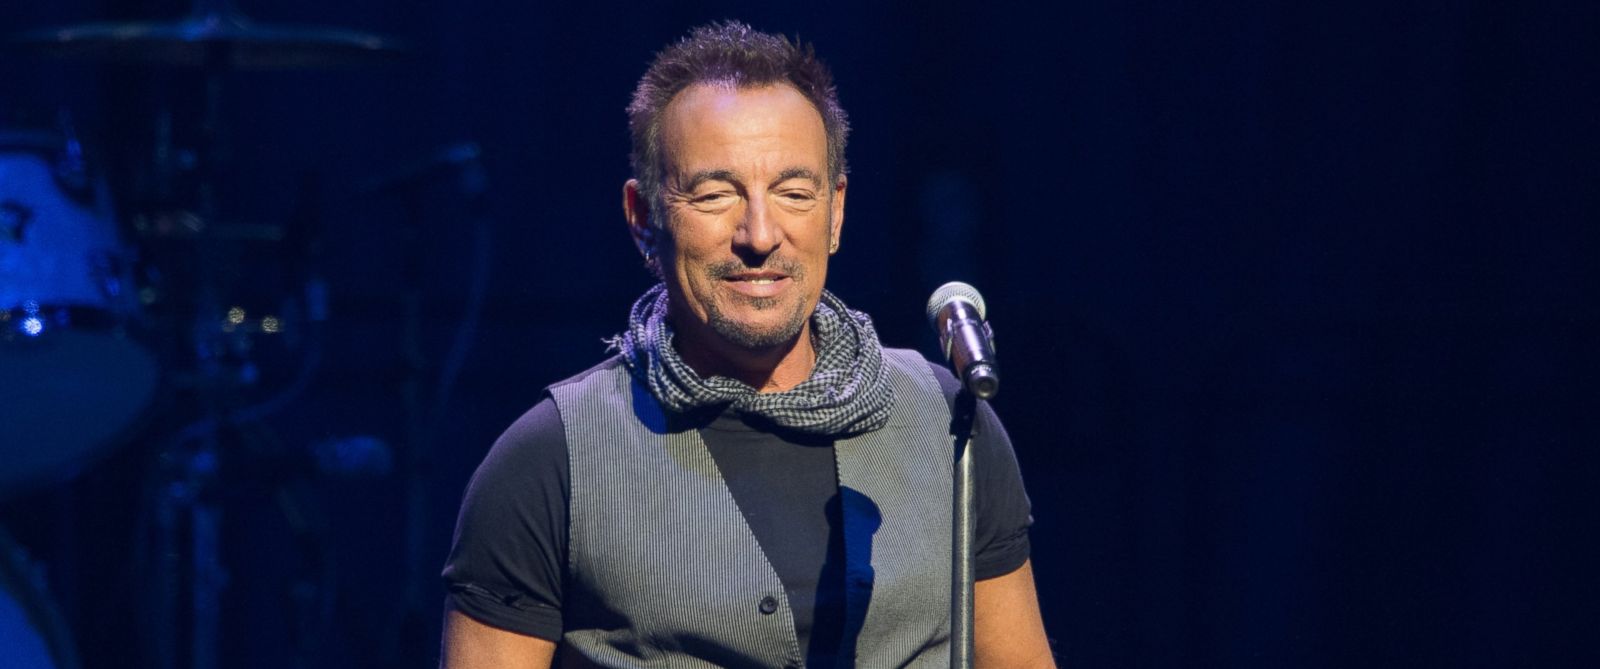 Bruce Springsteen Opens Up About Struggles With Depression - ABC News